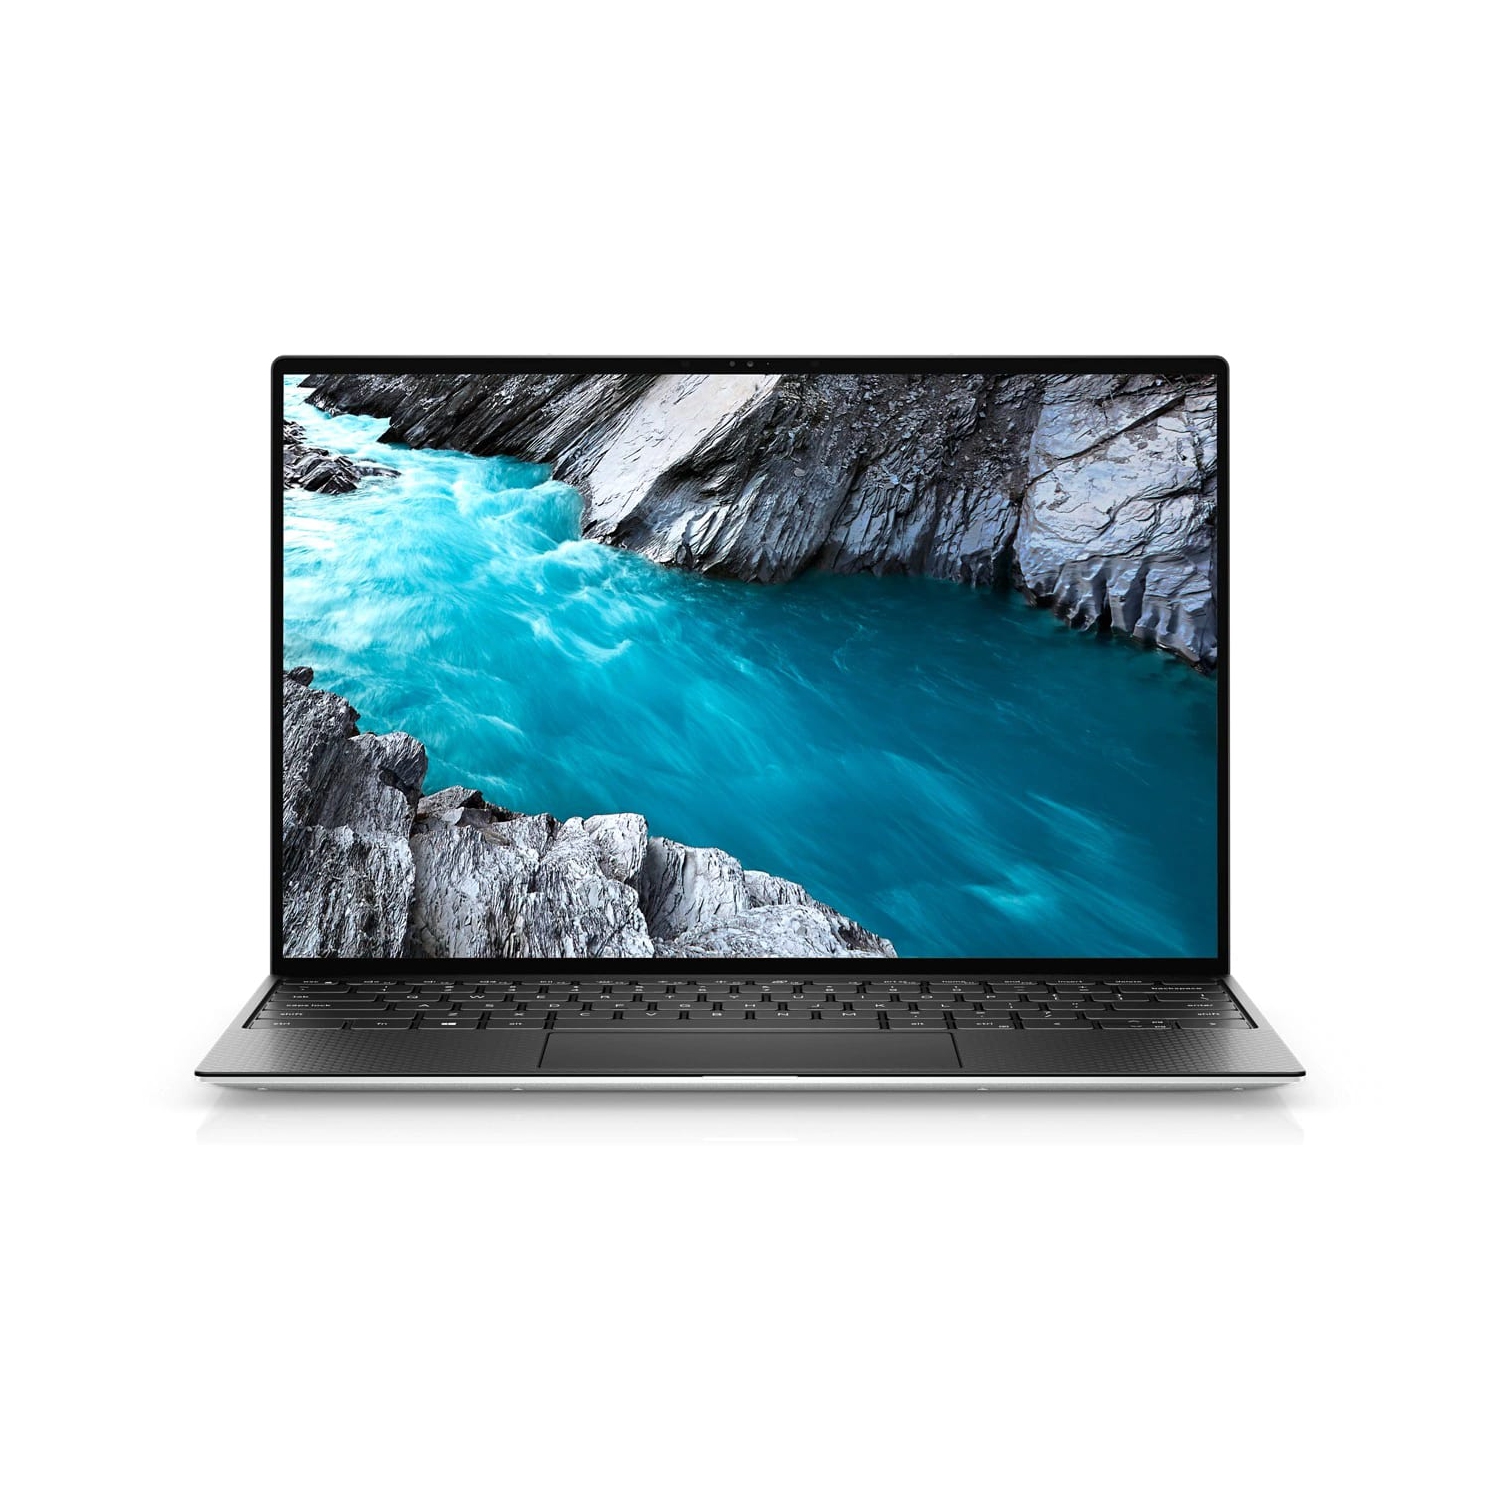 Dell XPS 13 9310 Laptop (2020) | 13.4" FHD+ Touch | Core i5 - 256GB SSD - 16GB RAM | 4 Cores @ 4.2 GHz - 11th Gen CPU Certified Refurbished